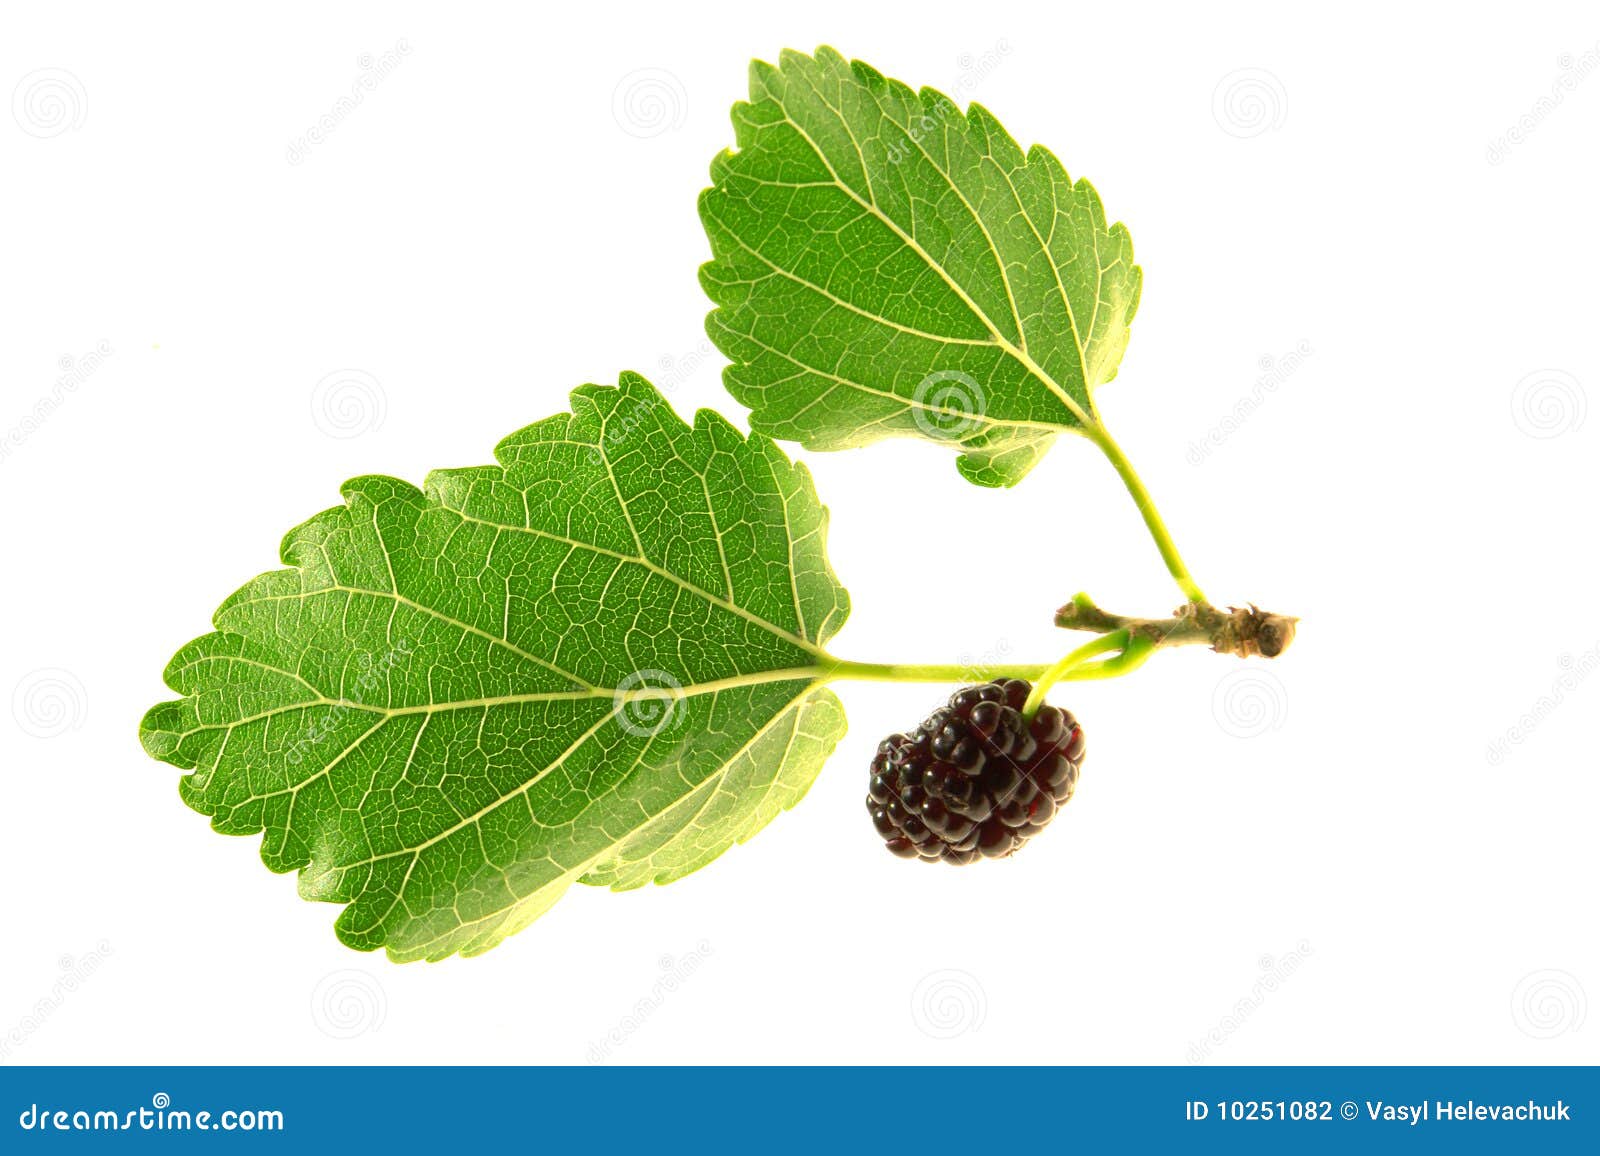 Mulberry, stock photo. Image of sweet, eating, edible - 10251082